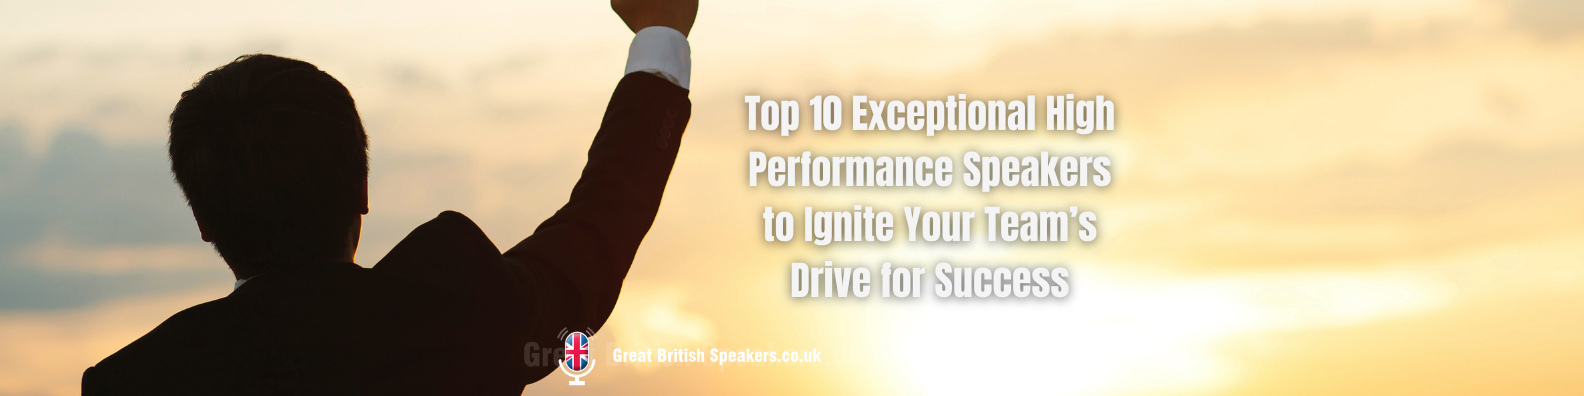 Top 10 Exceptional High Performance Speakers to Ignite Your Team’s Drive for Success